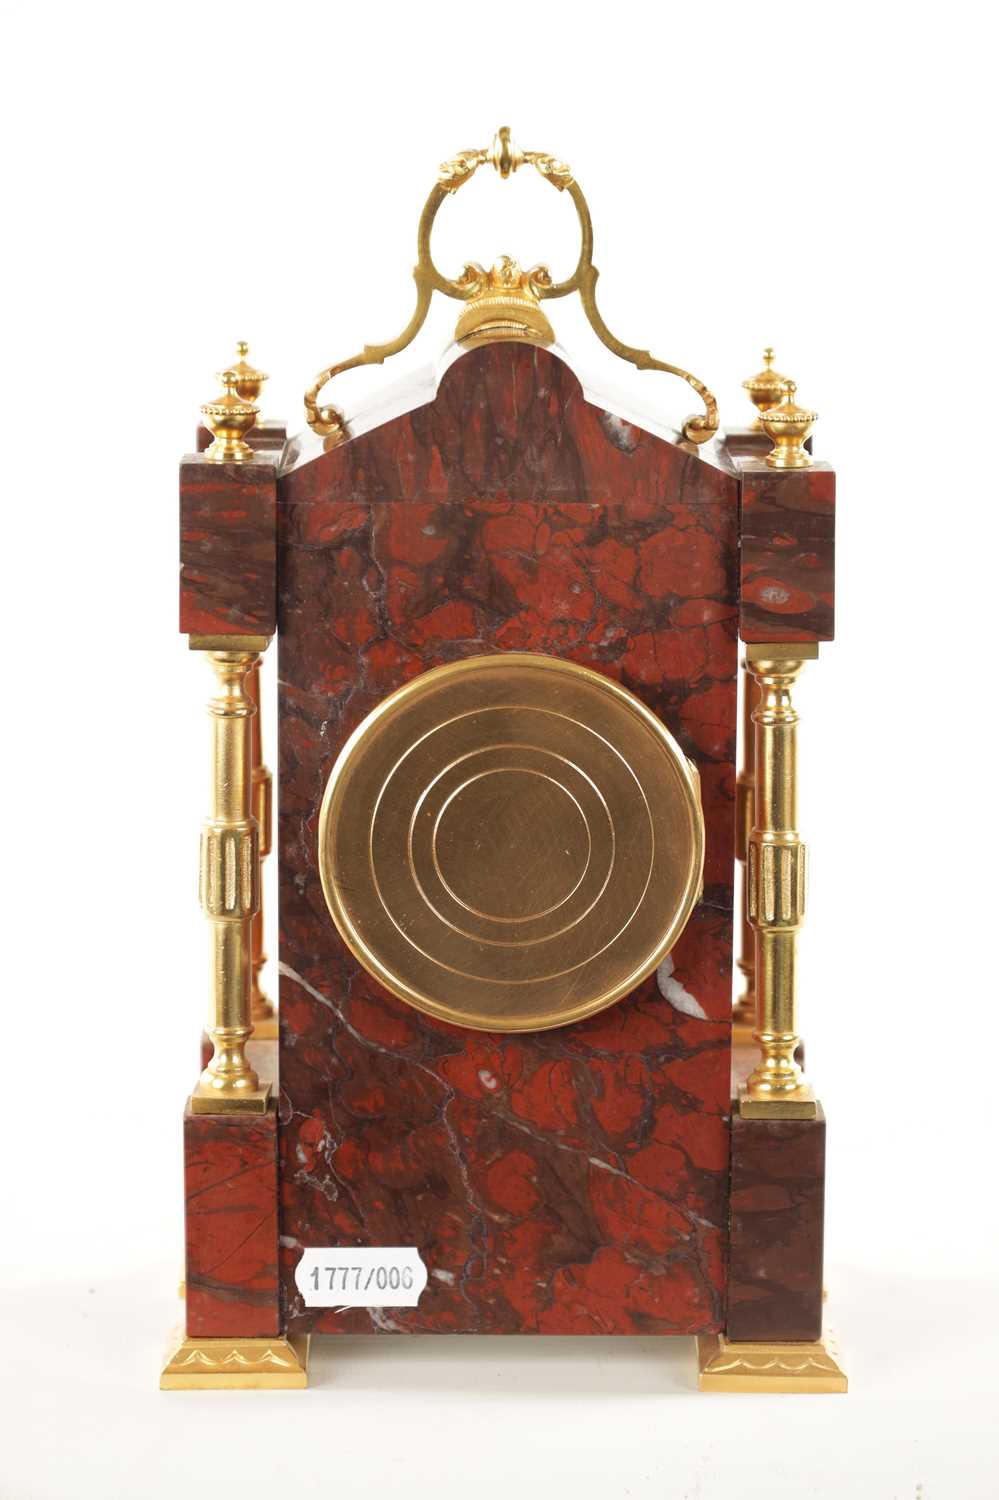 A LATE 19TH CENTURY FRENCH ORMOLU MOUNTED ROUGE MARBLE MANTEL CLOCK - Image 5 of 7